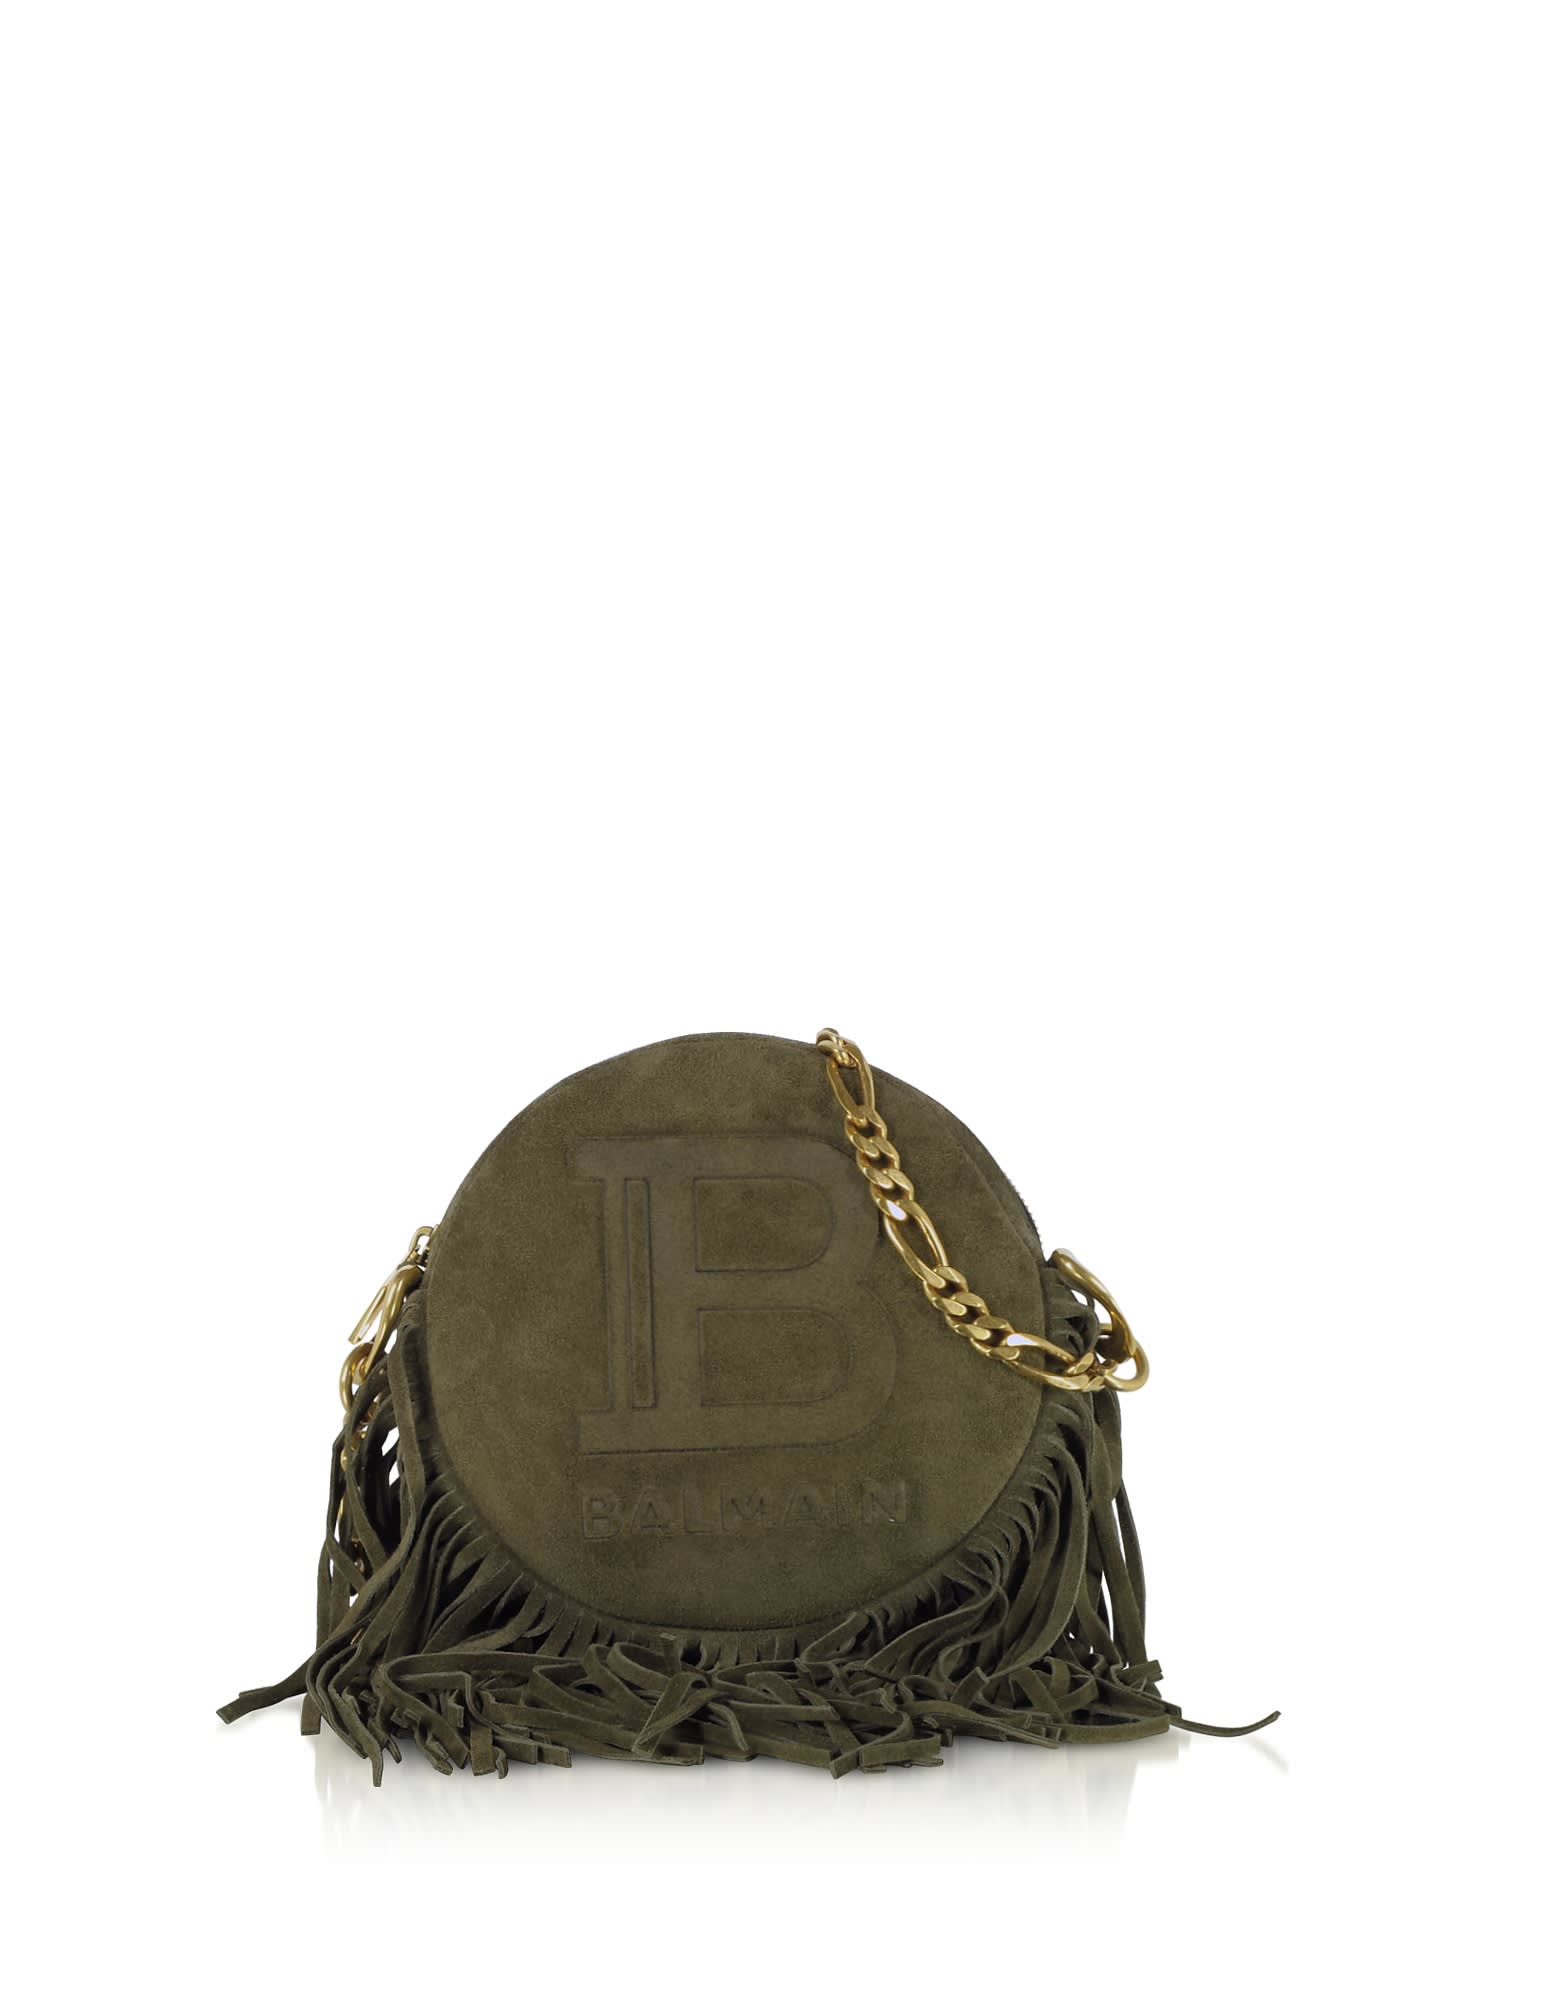 Balmain Suede Leather And Fringes 18 Disco Bag In Khaki